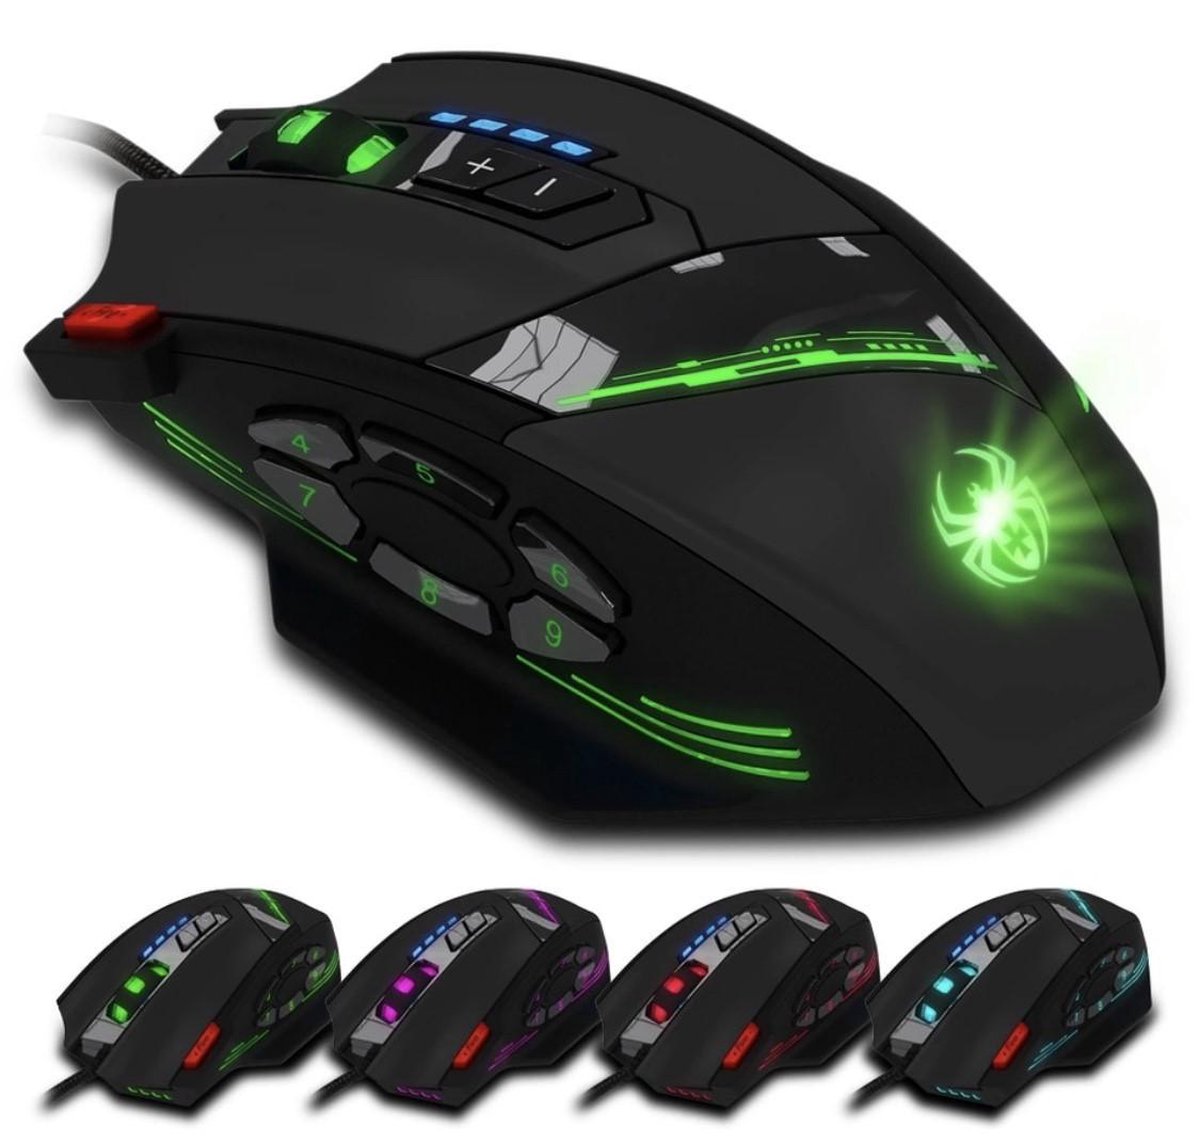 Technite Spider High Performance Gaming Muis - Game Muis - Rapid Fire - Aanpasbare DPI